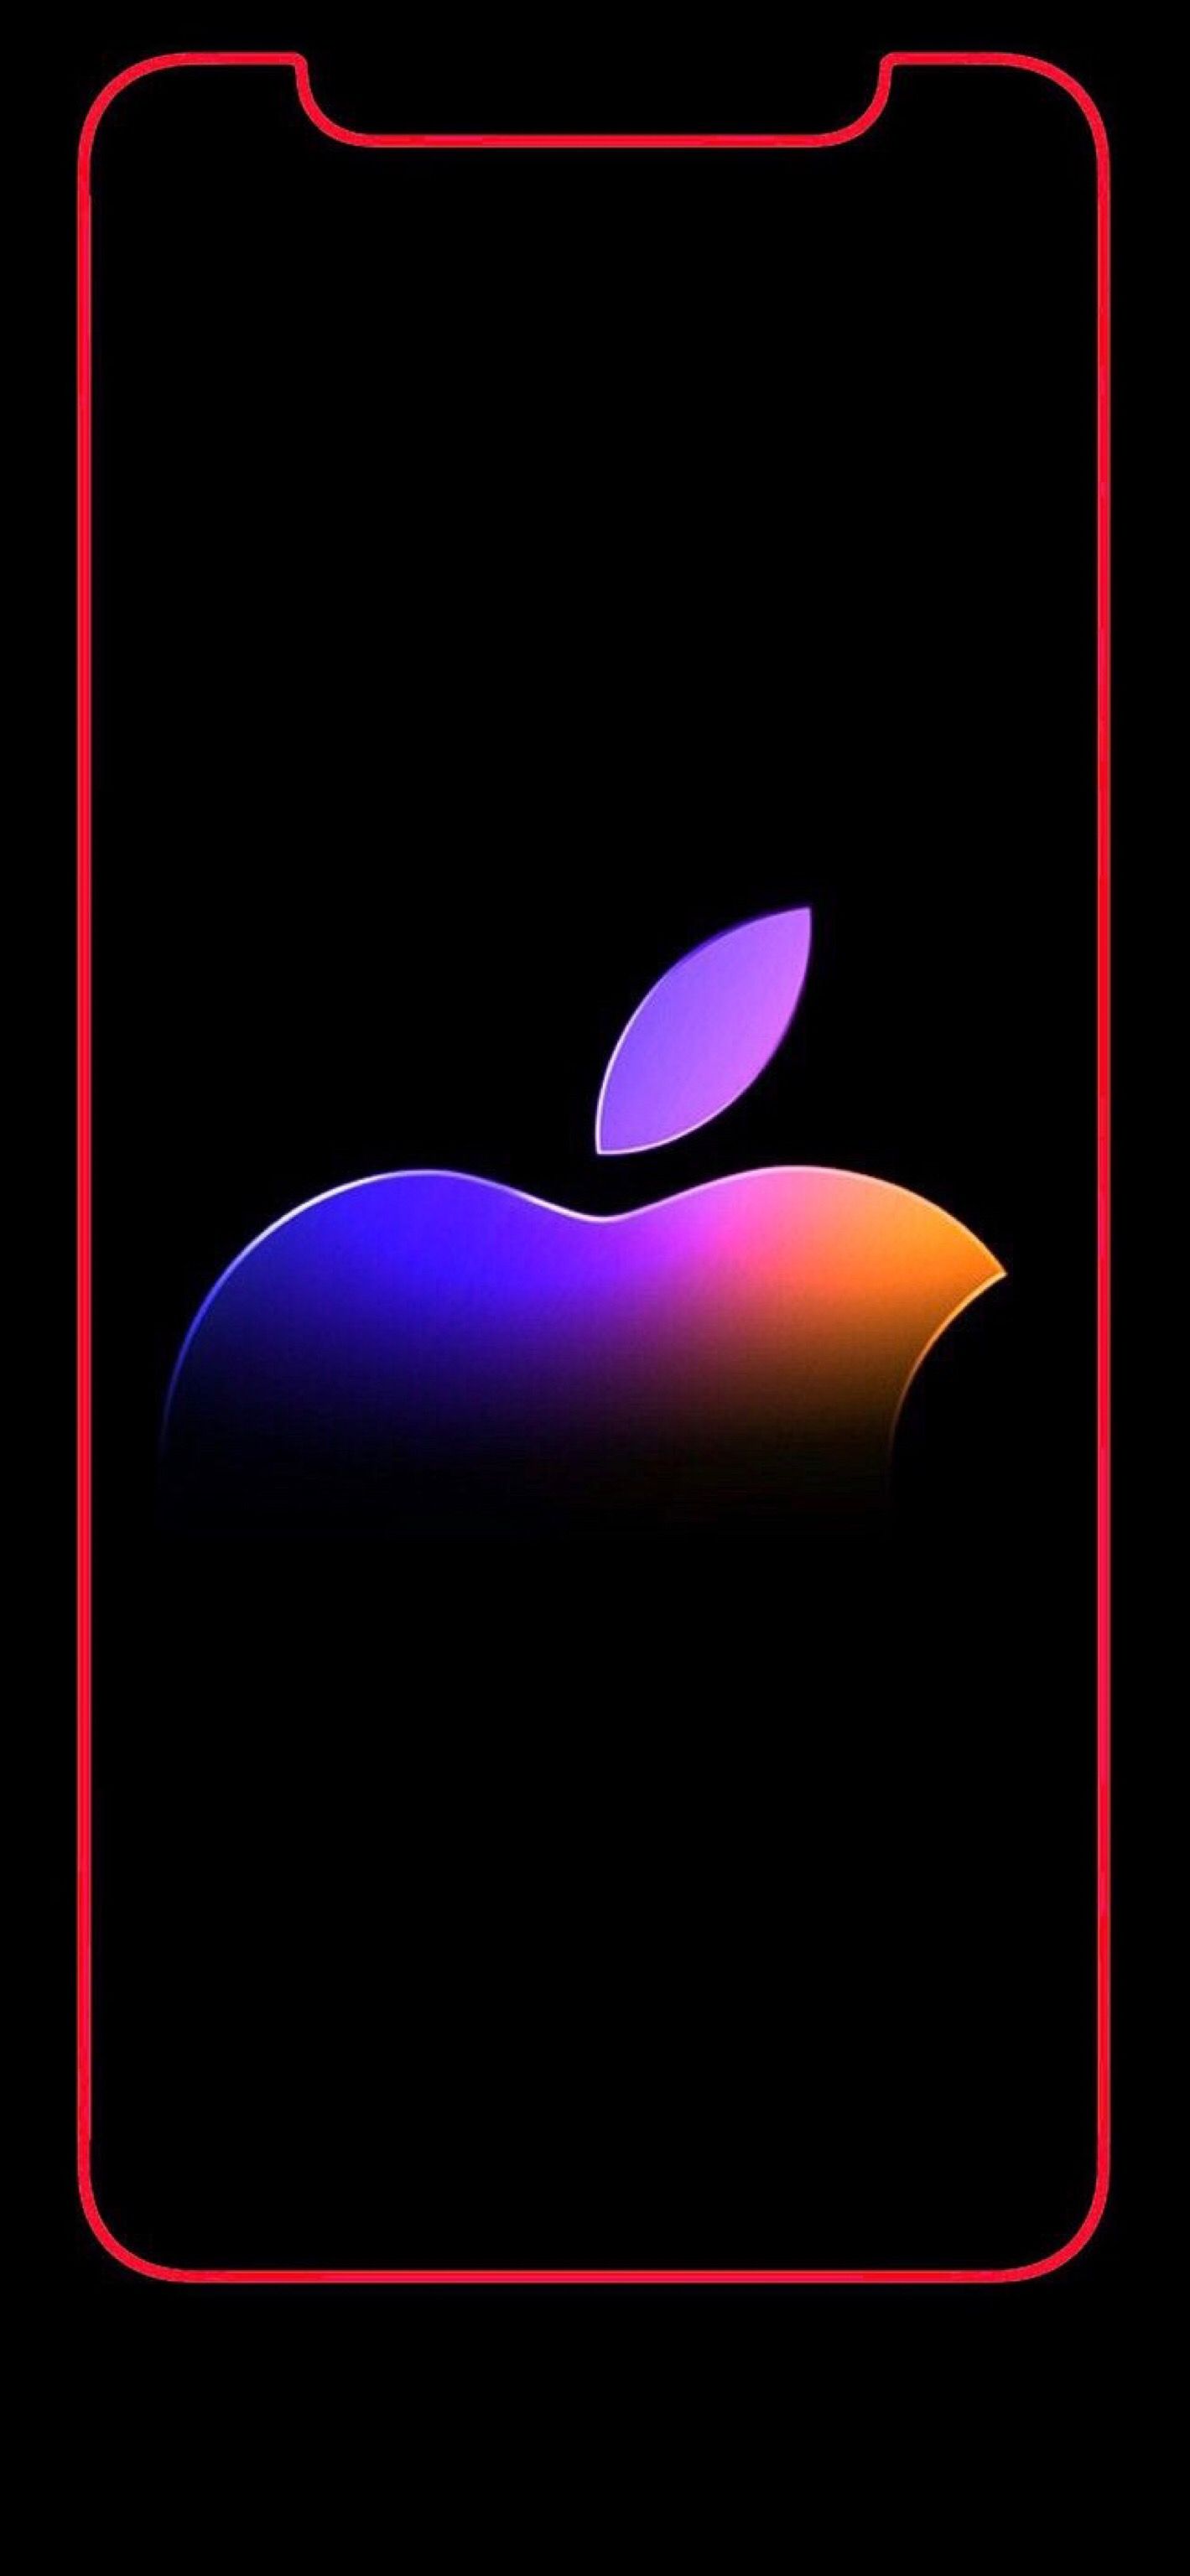 Iphone X Apple Wallpapers